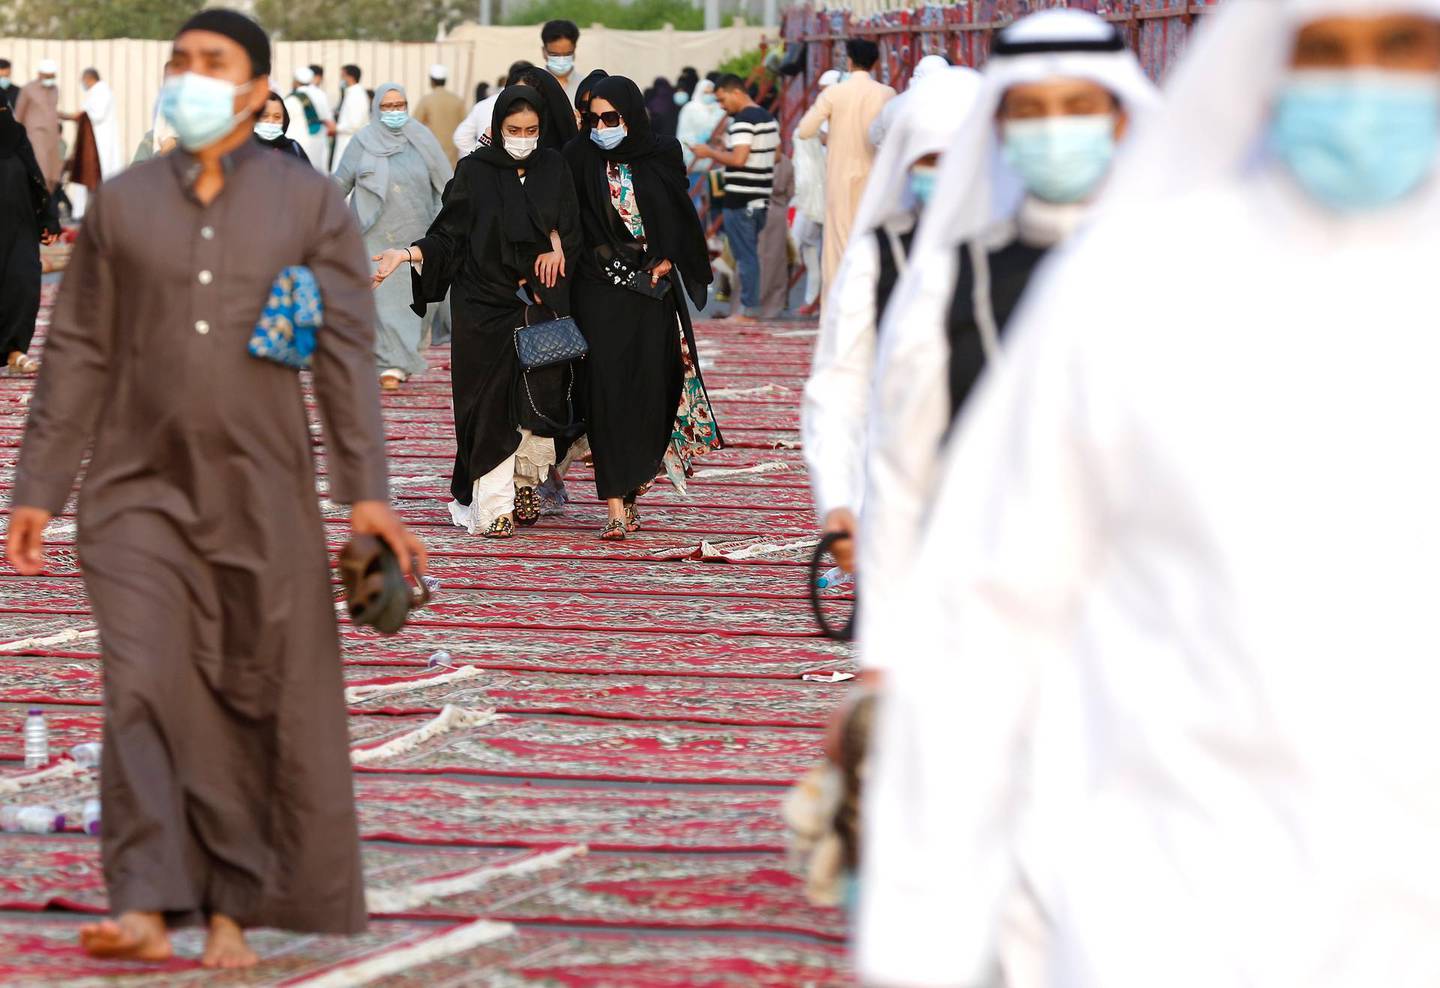 Muslim women, center rear, wearing masks to curb the spread of coronavirus outbreak, walk on carpets after they performed Eid al-Fitr prayer marking the end of the holy fasting month of Ramadan at al-Mirabi Mosque in Jiddah, Saudi Arabia, Thursday, May 13, 2021. (AP Photo/Amr Nabil)